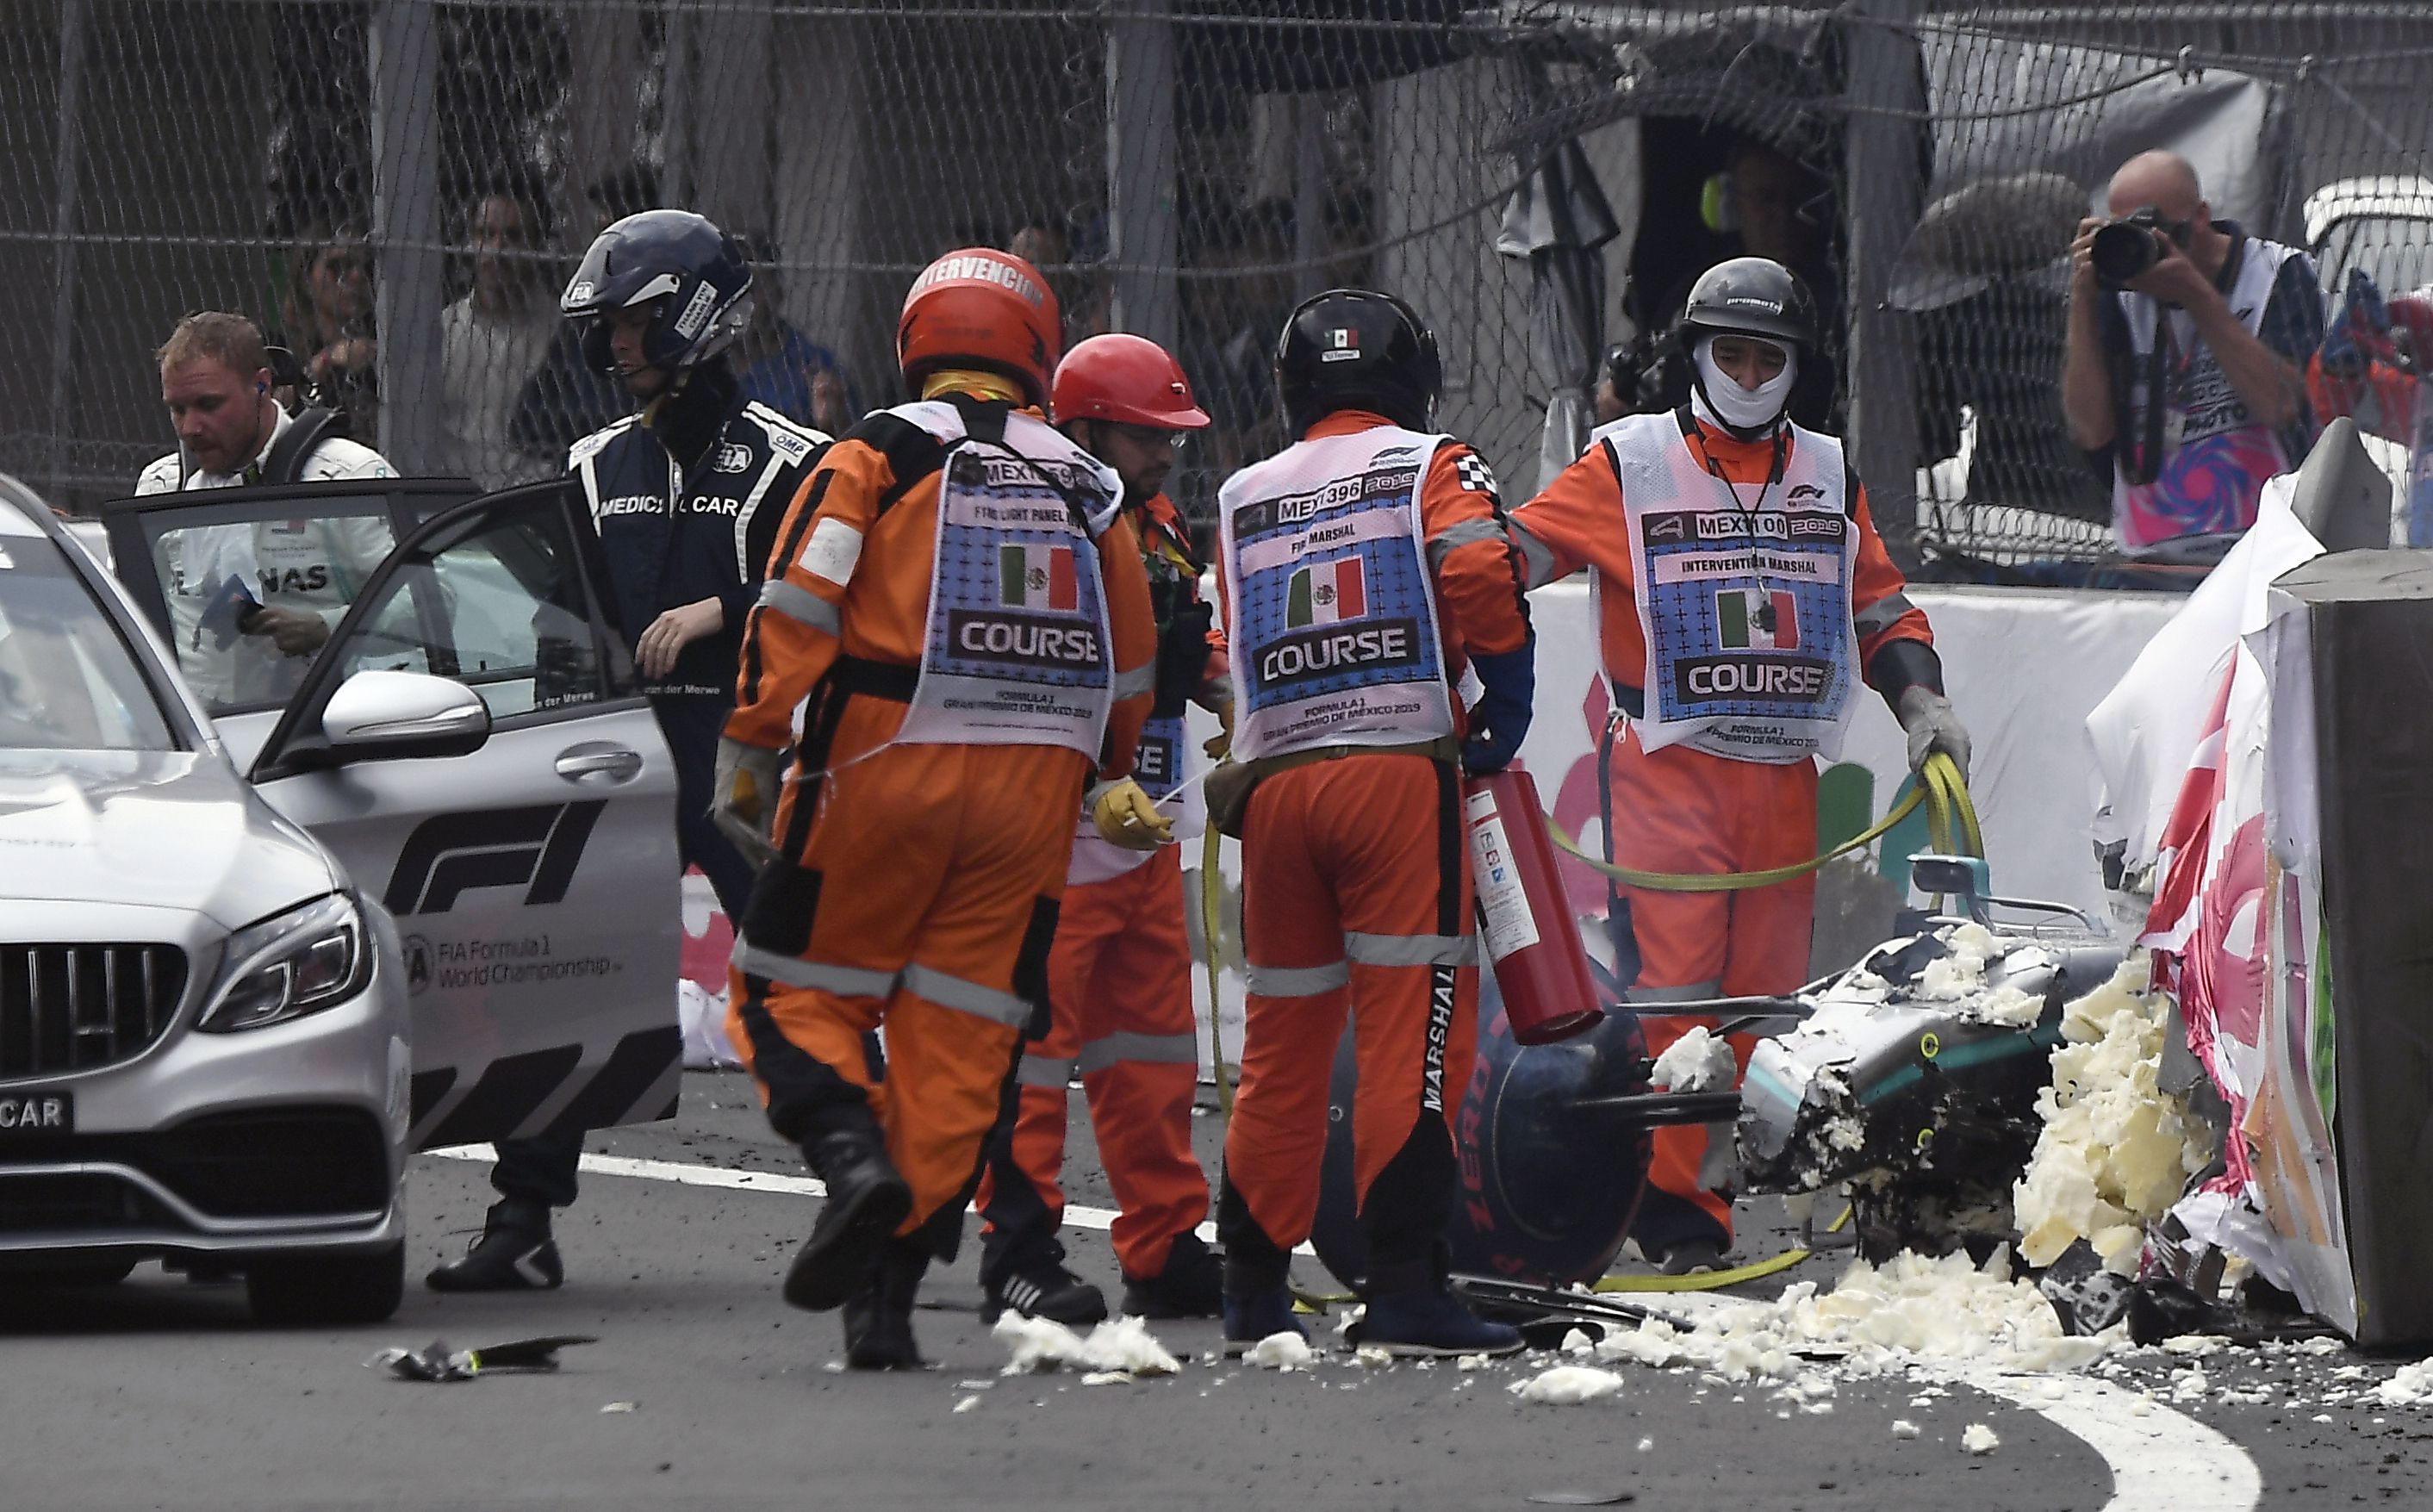 Mercedes Benz's Finnish driver Valtteri Bottas (L) leaves the racing track after crashing his car during the qualifying session of the F1 Mexico Grand Prix at the Hermanos Rodriguez circuit in Mexico City on October 26, 2019. (Photo by ALFREDO ESTRELLA / AFP)